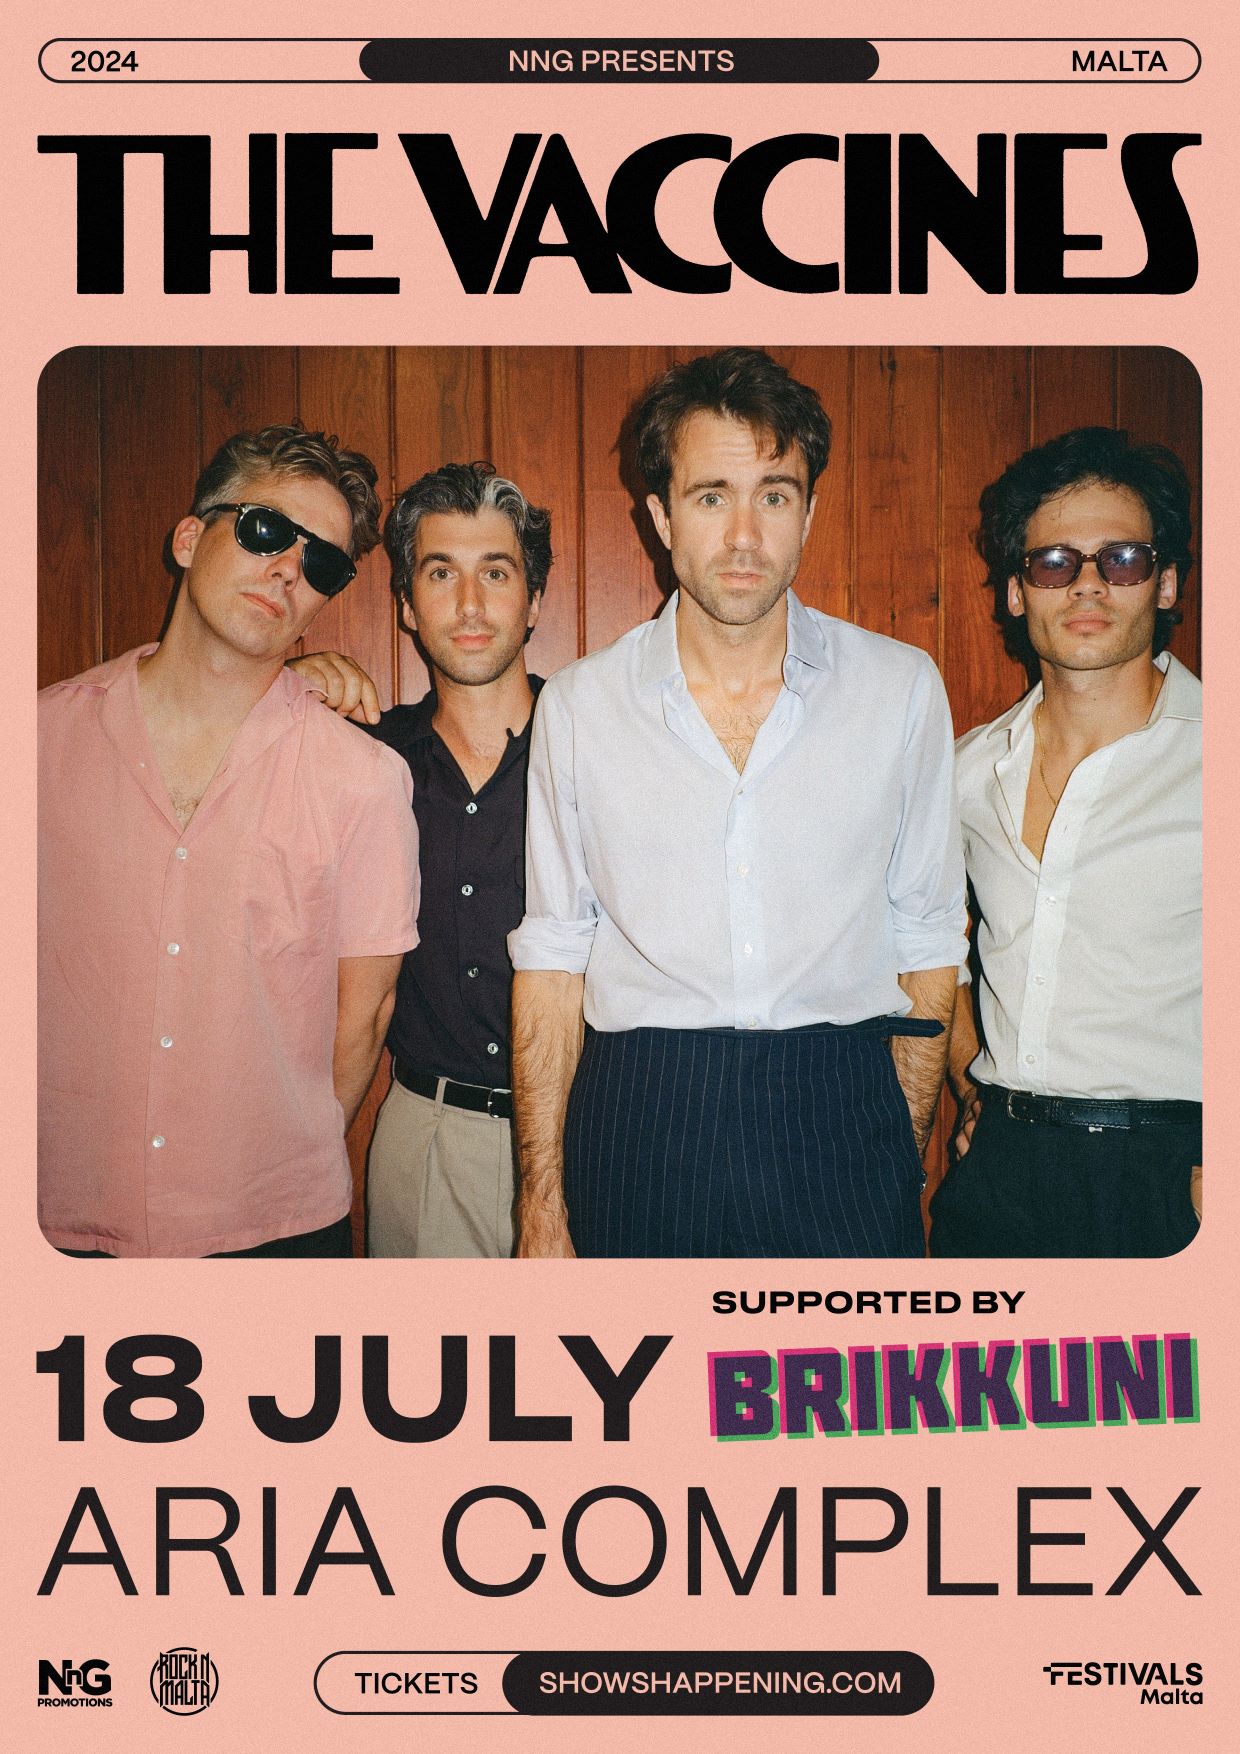 The Vaccines poster